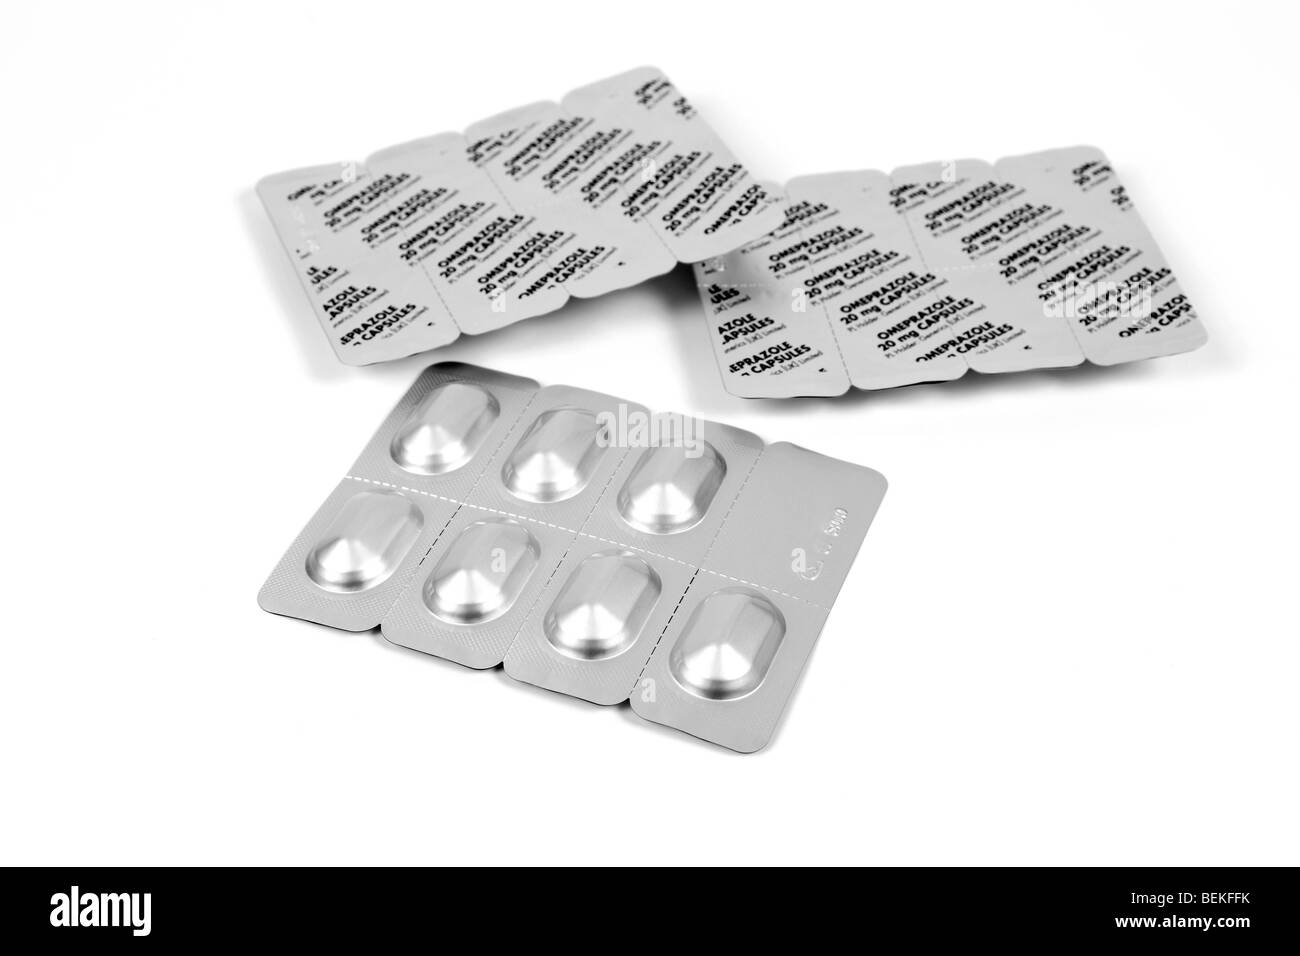 Blister packs of Omeprazole Gastro-Resistant Capsules used to treat Ulcers Stock Photo